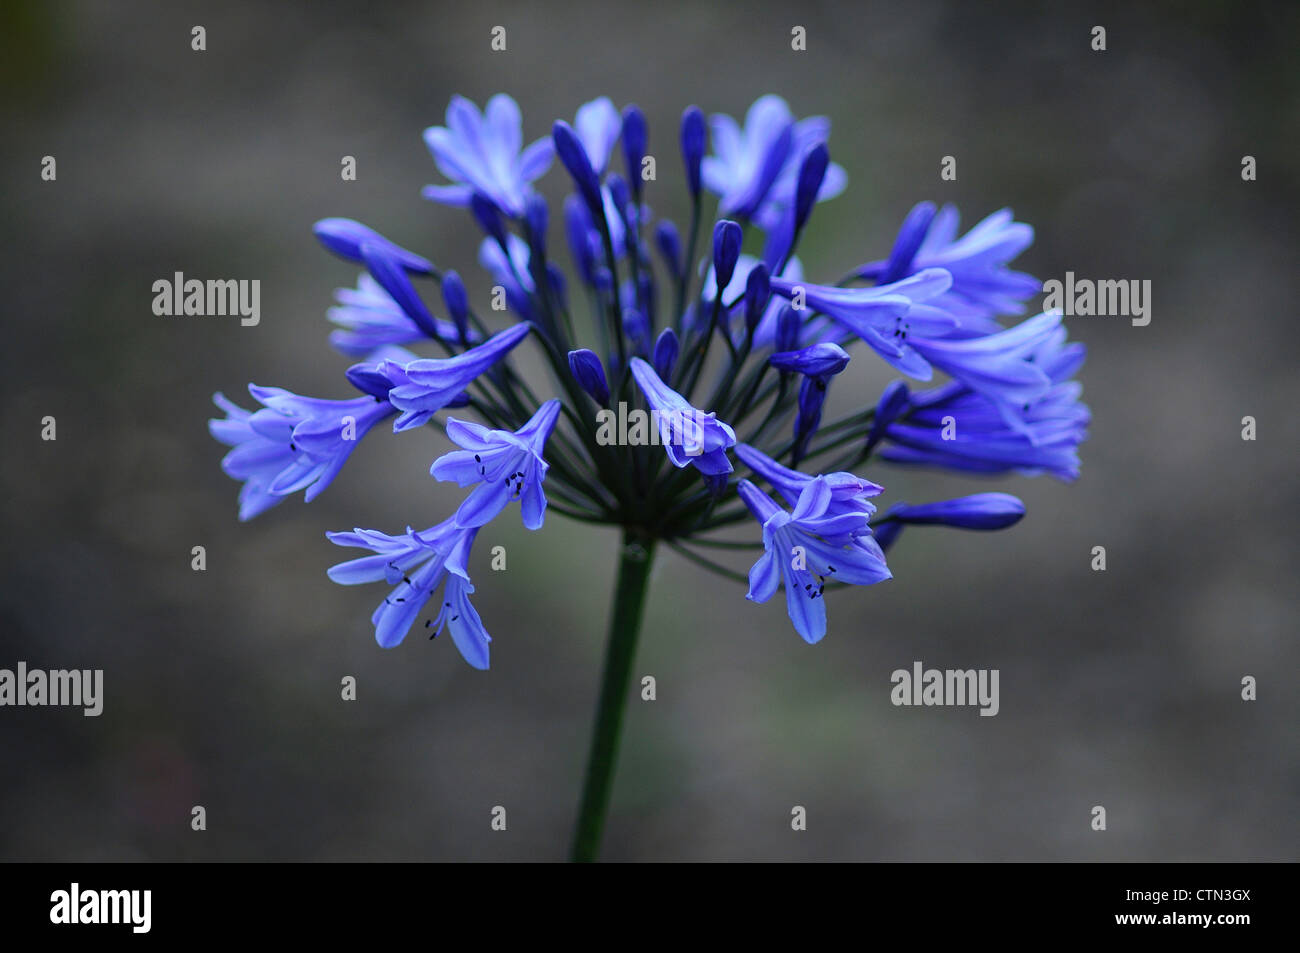 The flower head of an agapanthus lily UK Stock Photo